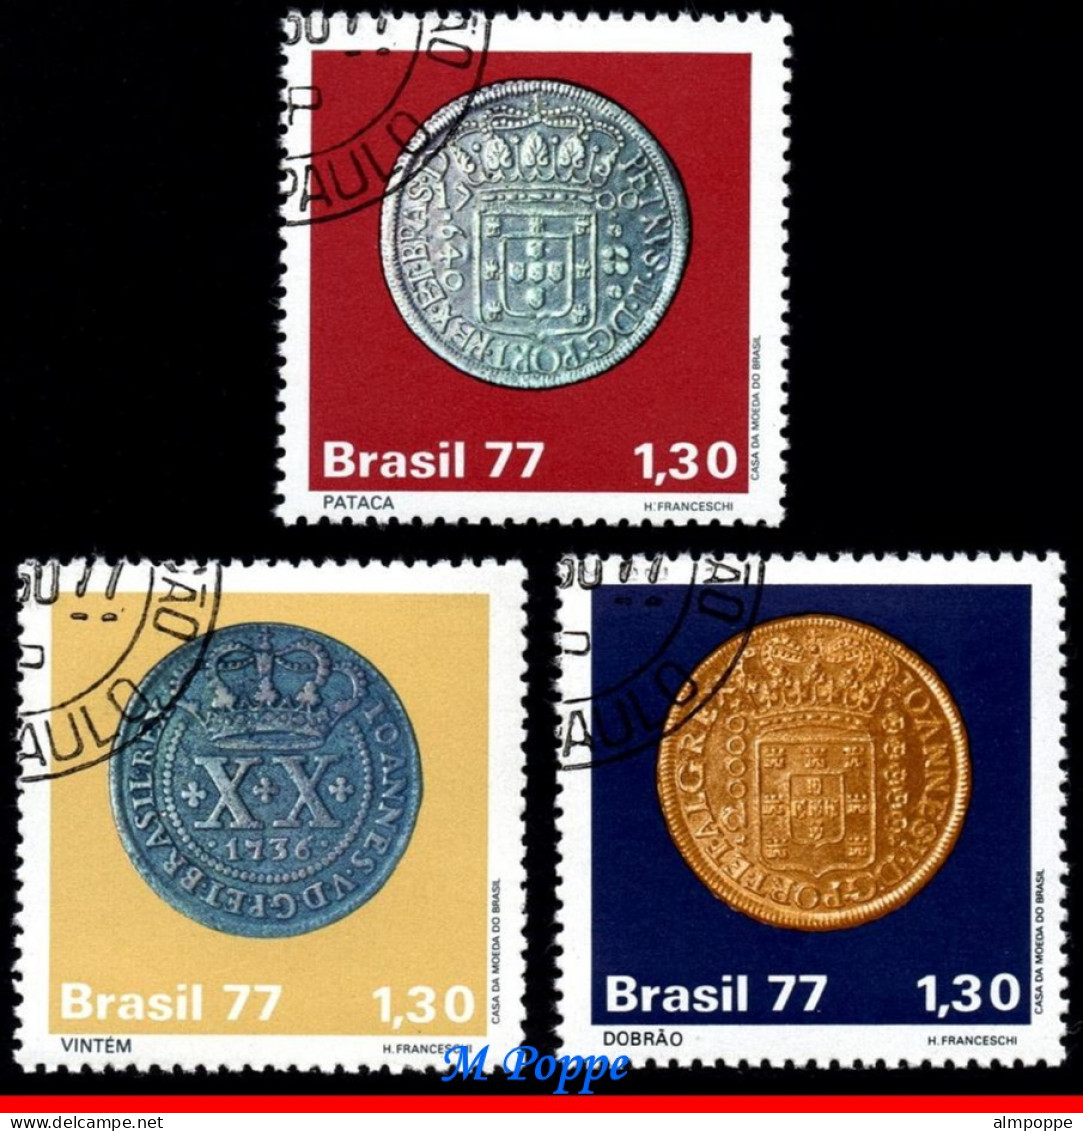 Ref. BR-1523-25-U BRAZIL 1977 - BRAZILIAN COLONIAL COINS,MI# 1615-17, SET USED NH, MONEY ON STAMPS 3V Sc# 1523-1525 - Used Stamps